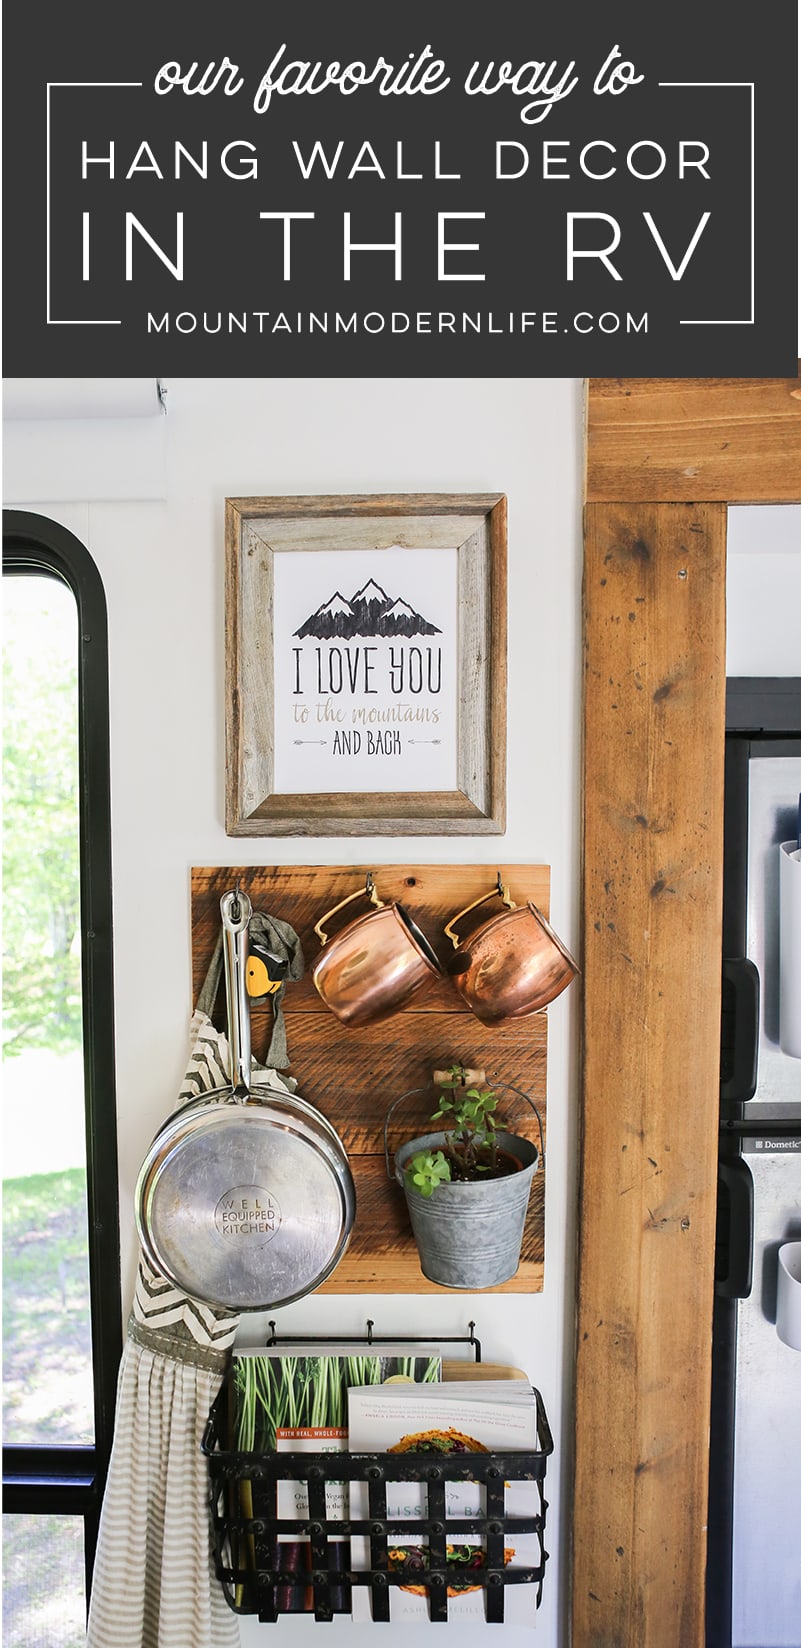 Looking for ways to easily hang frames without using screws or nails? Check out our favorite way to hang wall decor in the RV! MountainModernLife.com